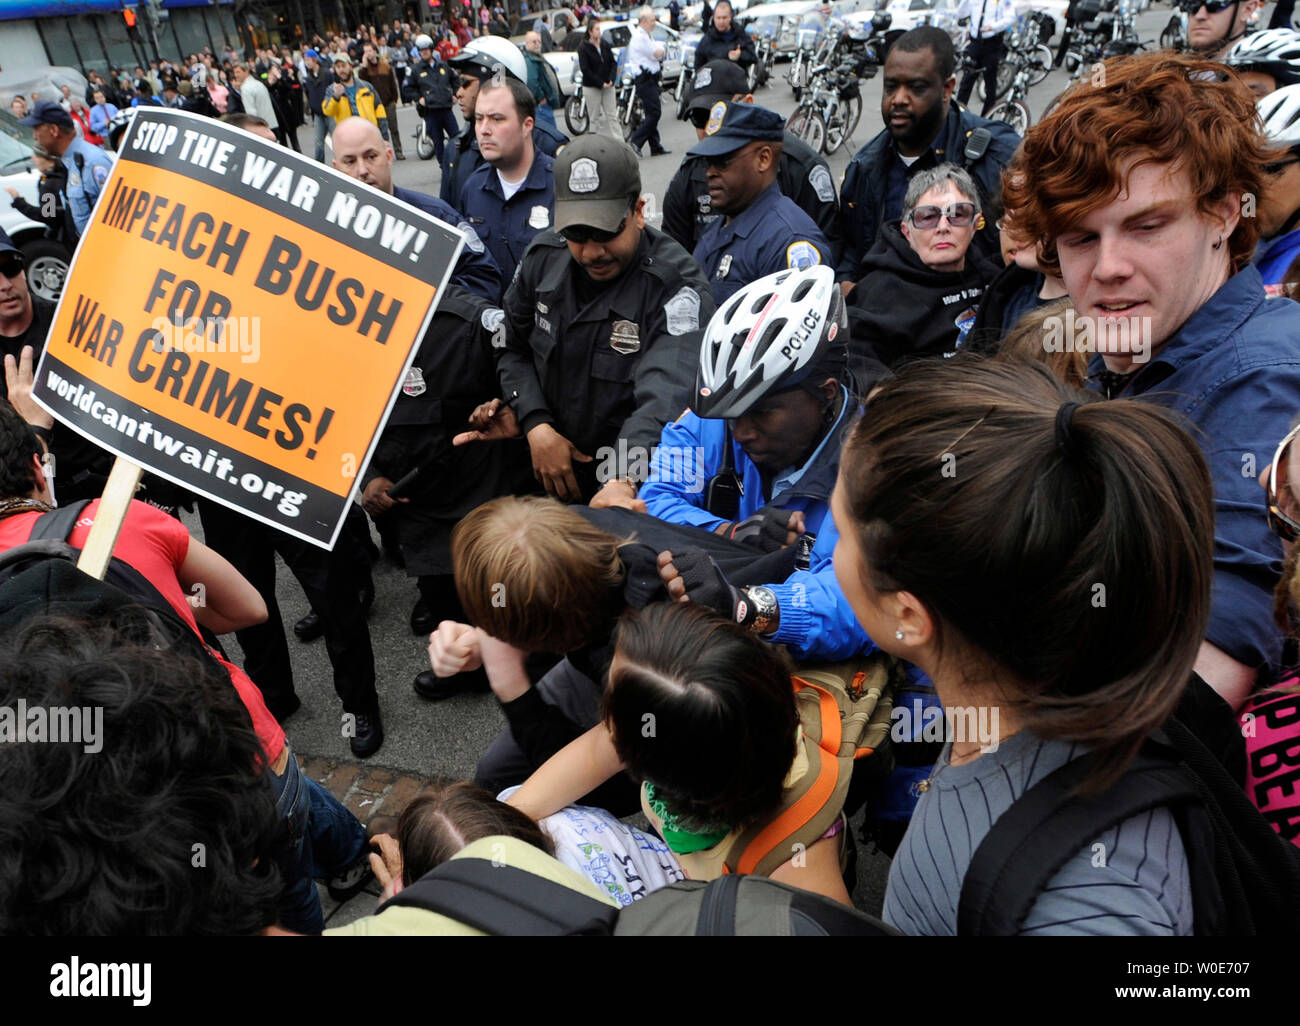 Anti-Iraq war protester clashes with police officers Washington on March 19, 2008.  Protesters took to the streets today across the Nation and in Washington to protest the 5th Anniversary of the U.S. invasion of Iraq. (UPI Photo/Kevin Dietsch) Stock Photo